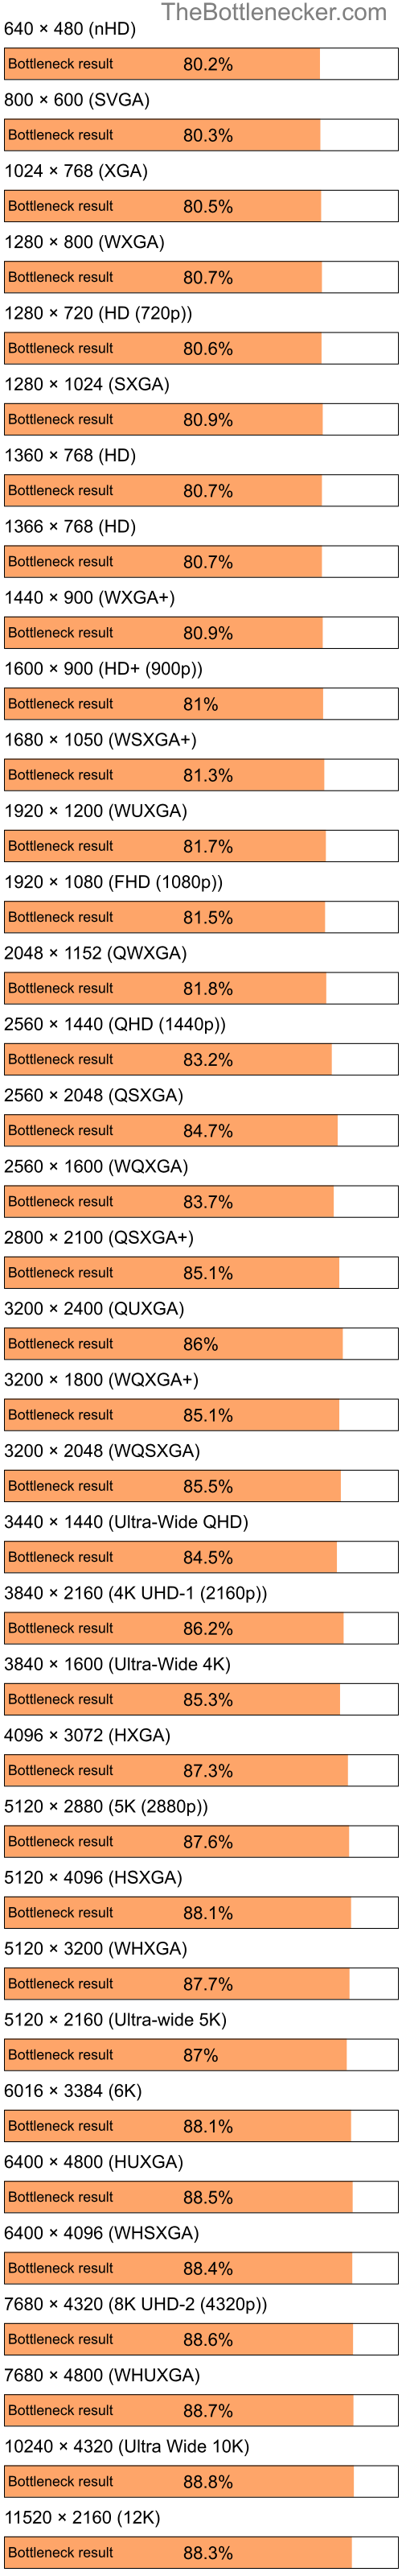 Bottleneck results by resolution for Intel Pentium 4 and AMD Radeon 9600 Family in General Tasks